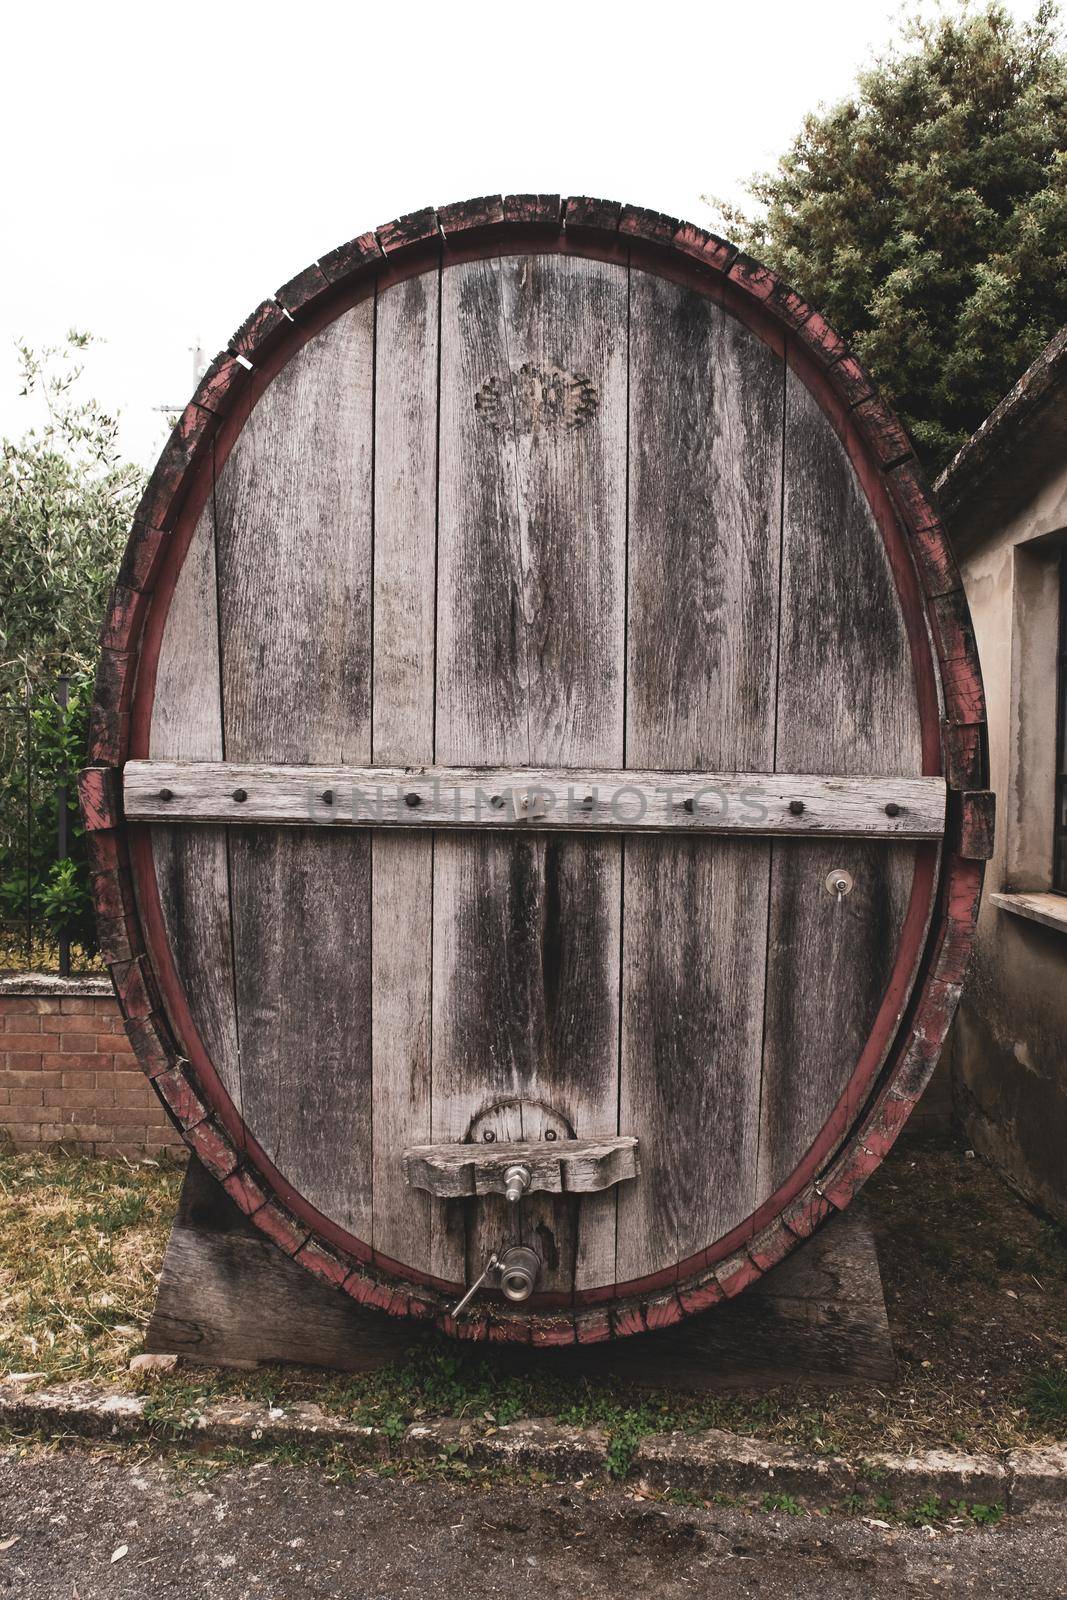 A close up of a huge wooden barrel for wine, Tuscany, Italy.